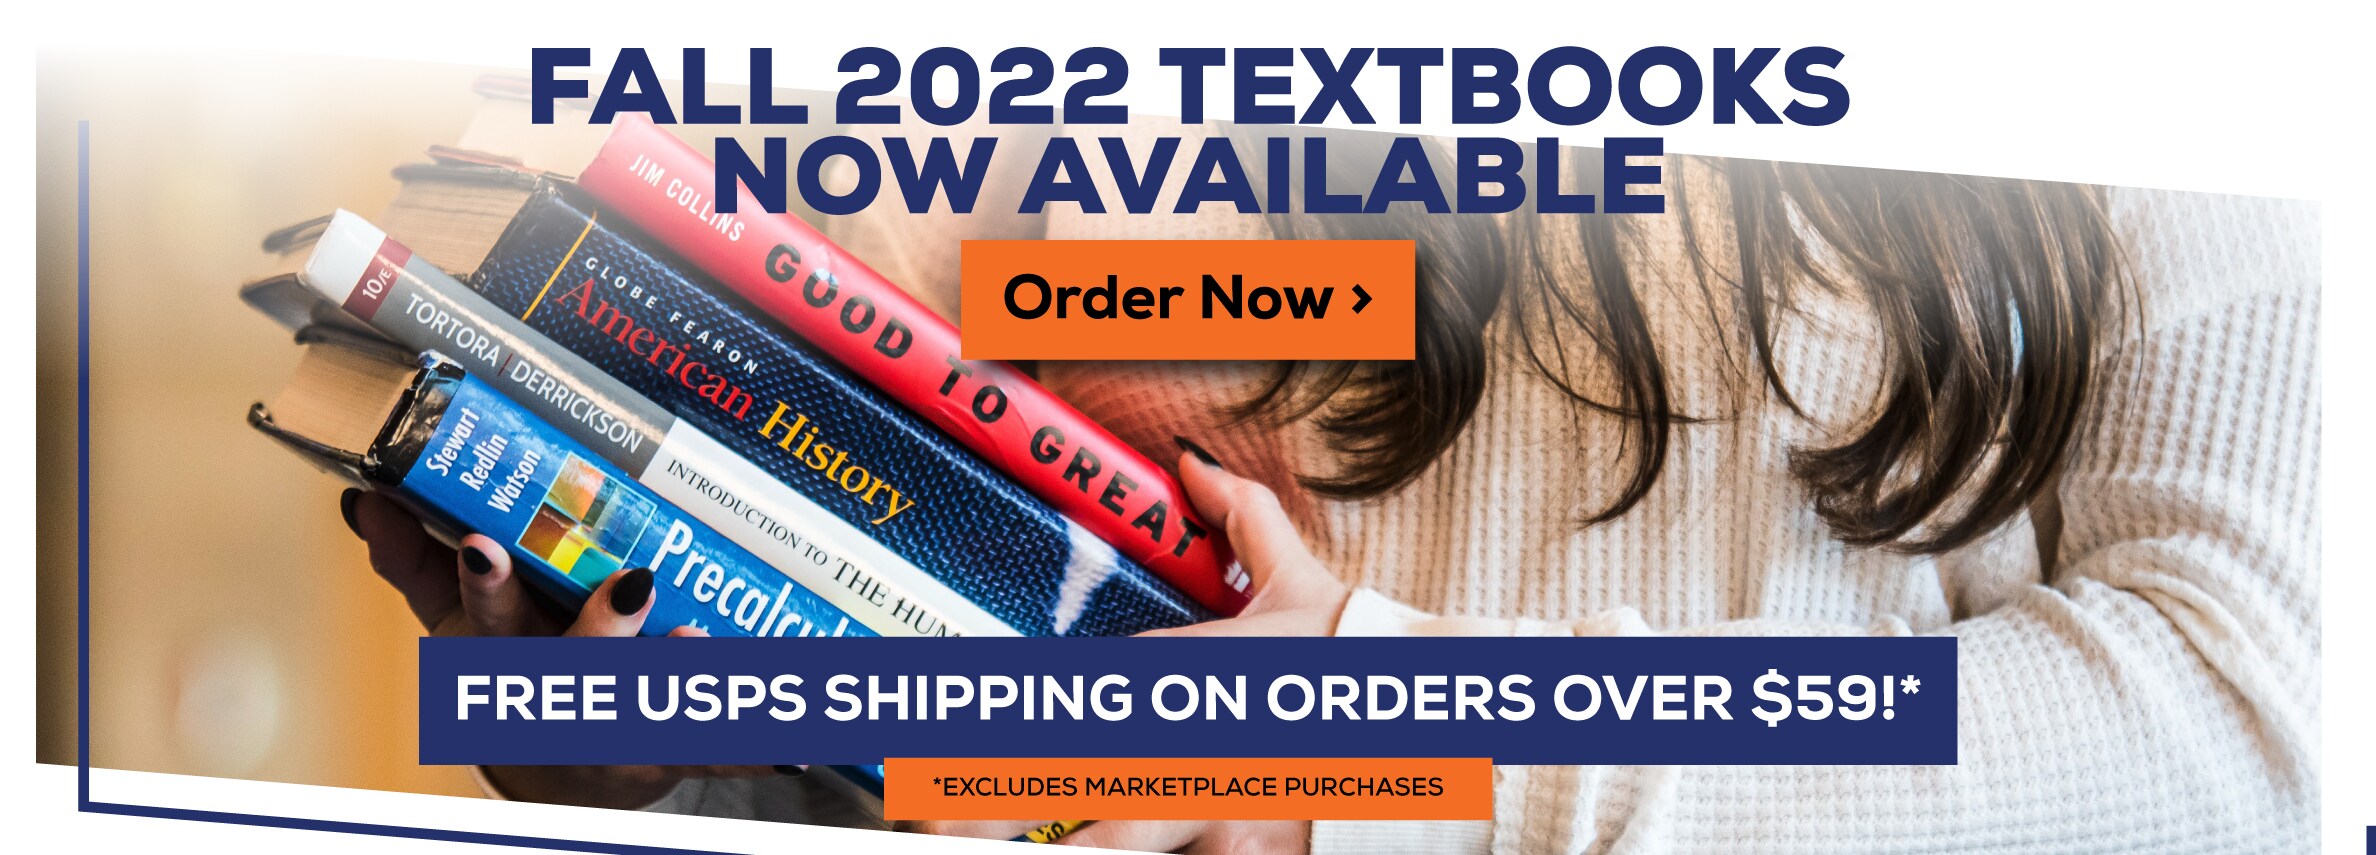 Fall 2022 Textbooks Now Available. Free USPS shipping on orders over $59!* Excludes marketplace purchases. Order Now.